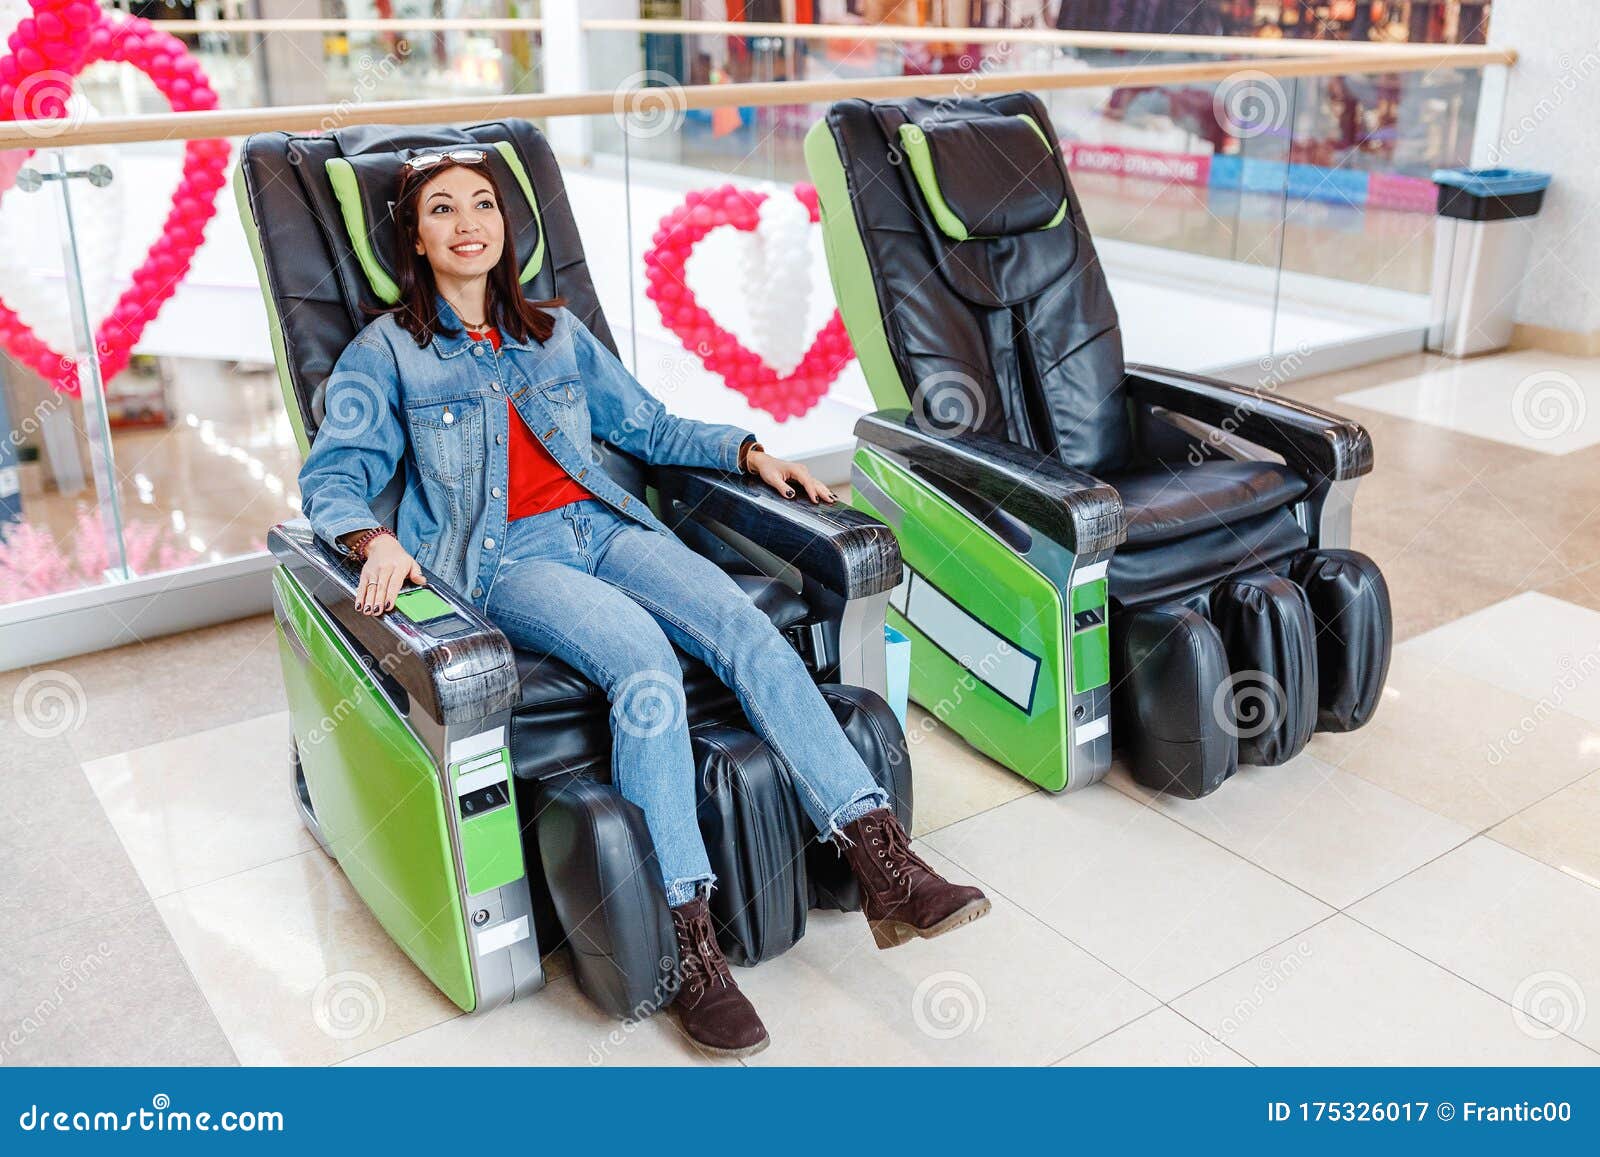 Lady Relaxing after Shopping in the Automated Massage Chair in the Mall